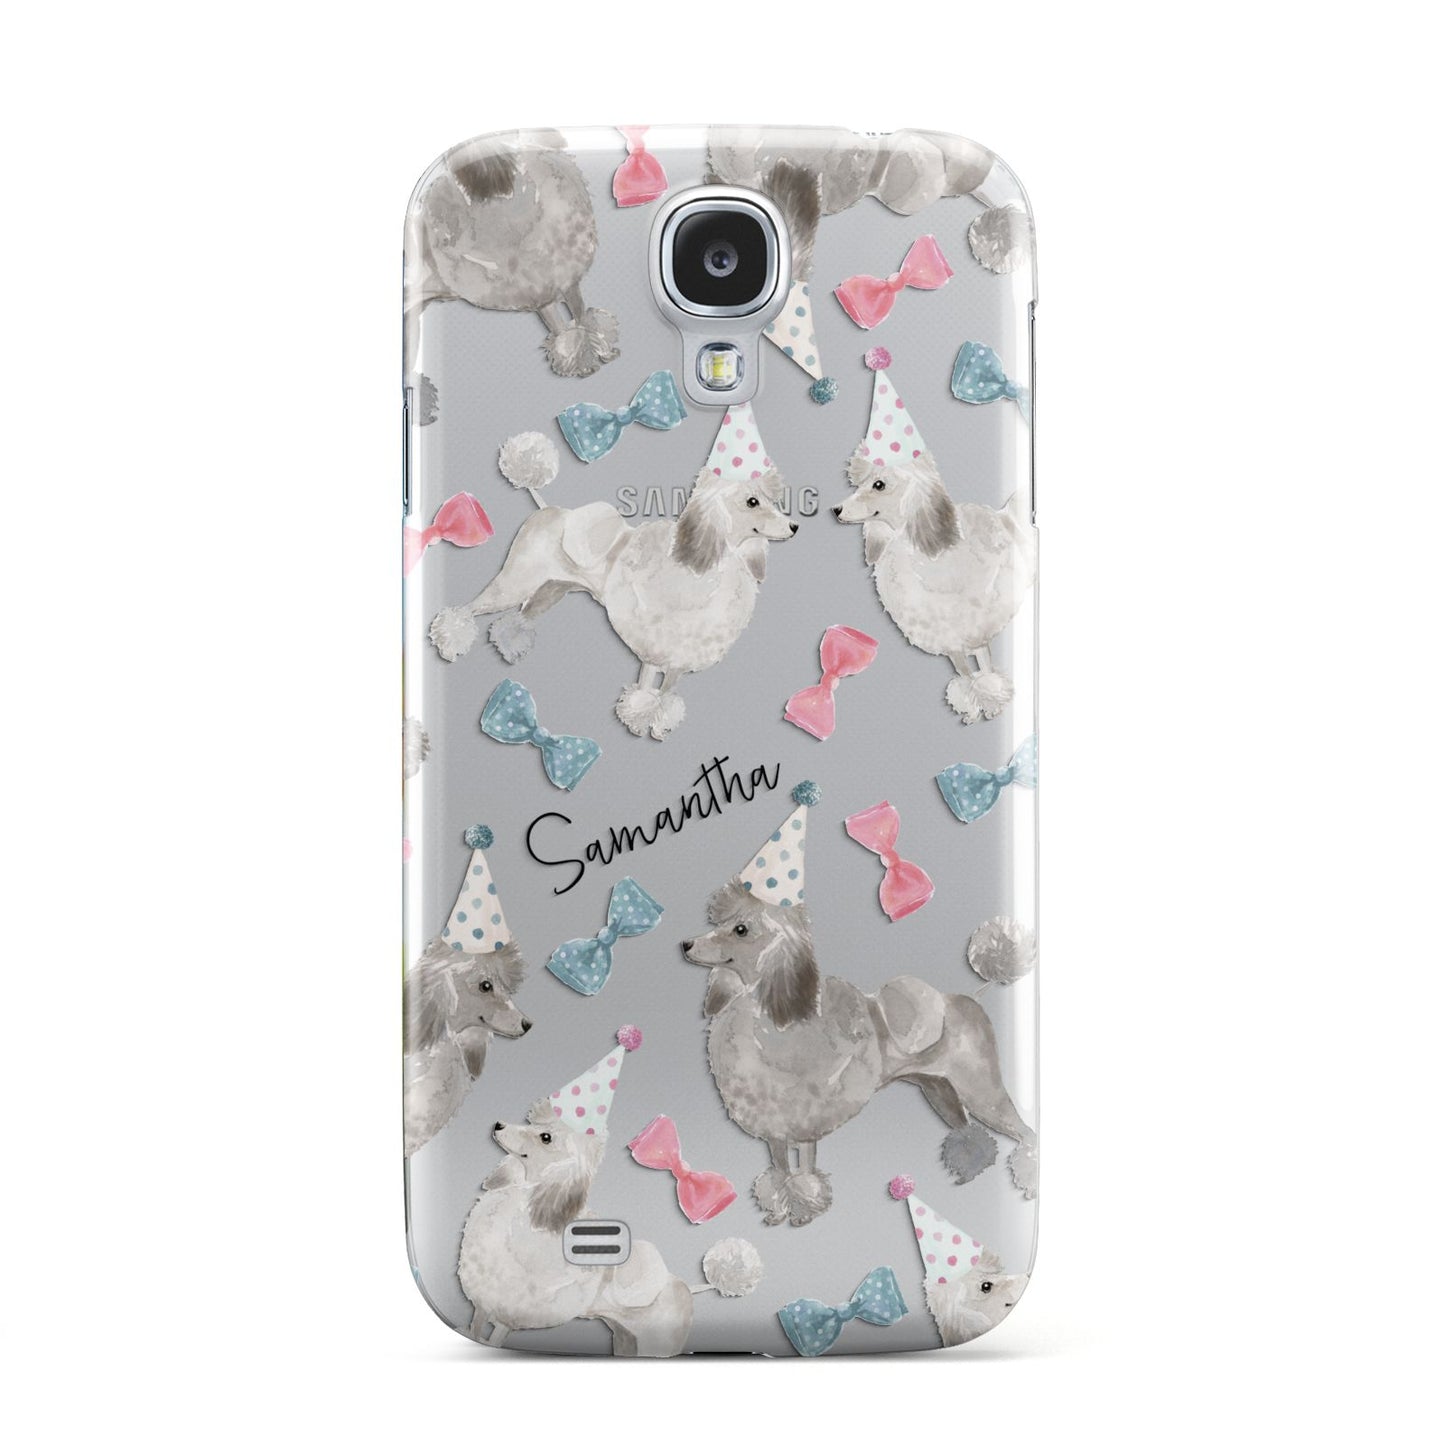 Personalised Poodle Dog Samsung Galaxy S4 Case